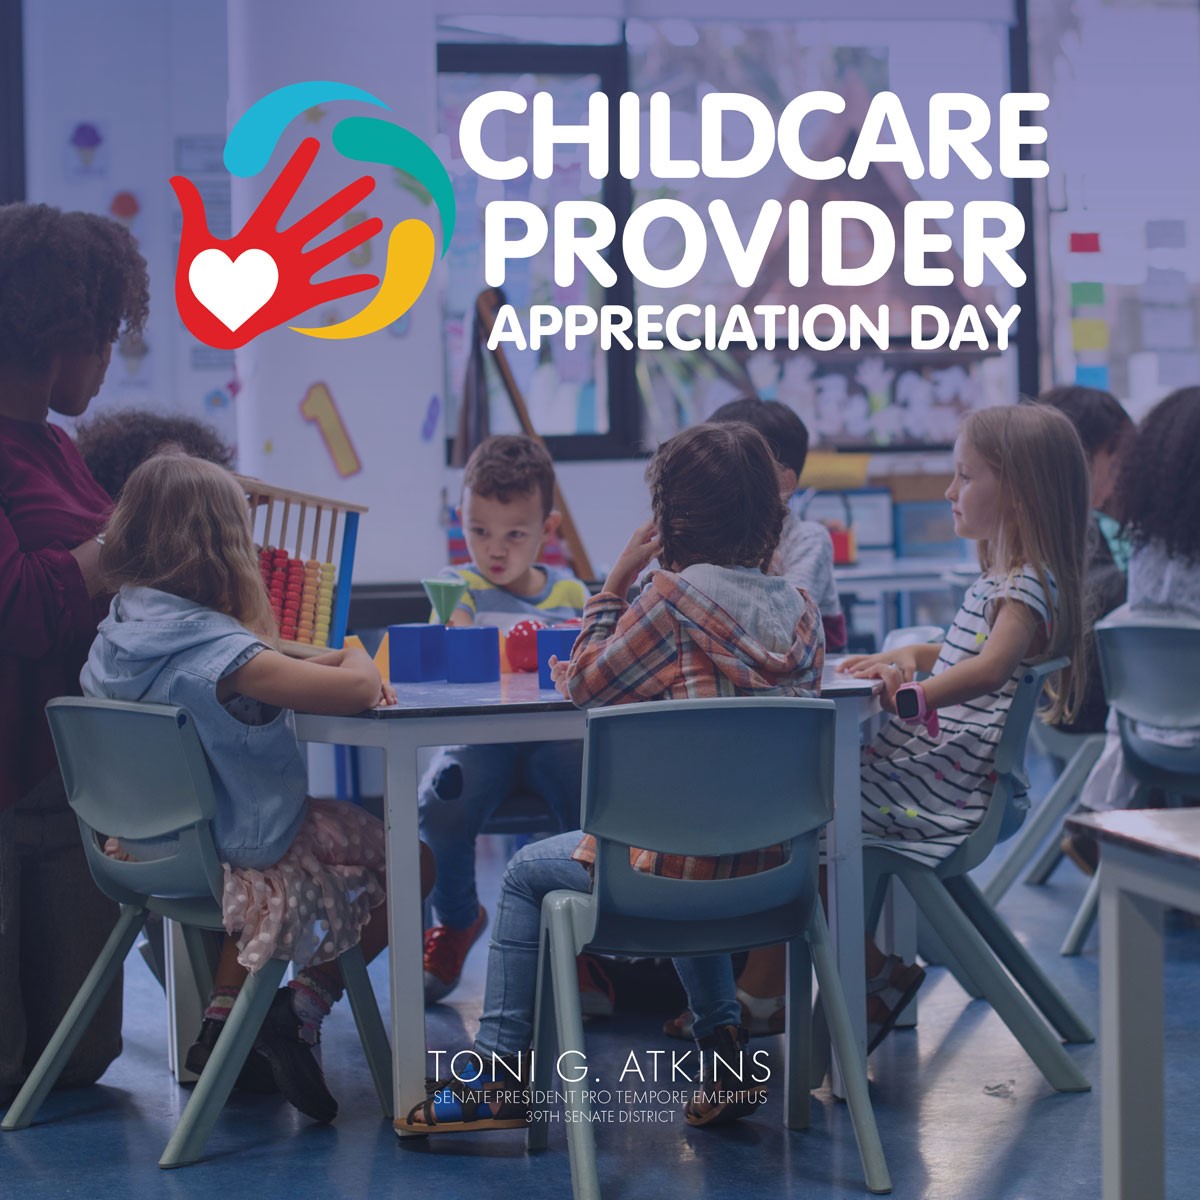 Childcare providers are educated professionals doing a critical job. Today and every day, I’m grateful for the work they do raising and teaching our next generation of leaders and supporting working parents! #ChildcareProviderAppreciationDay